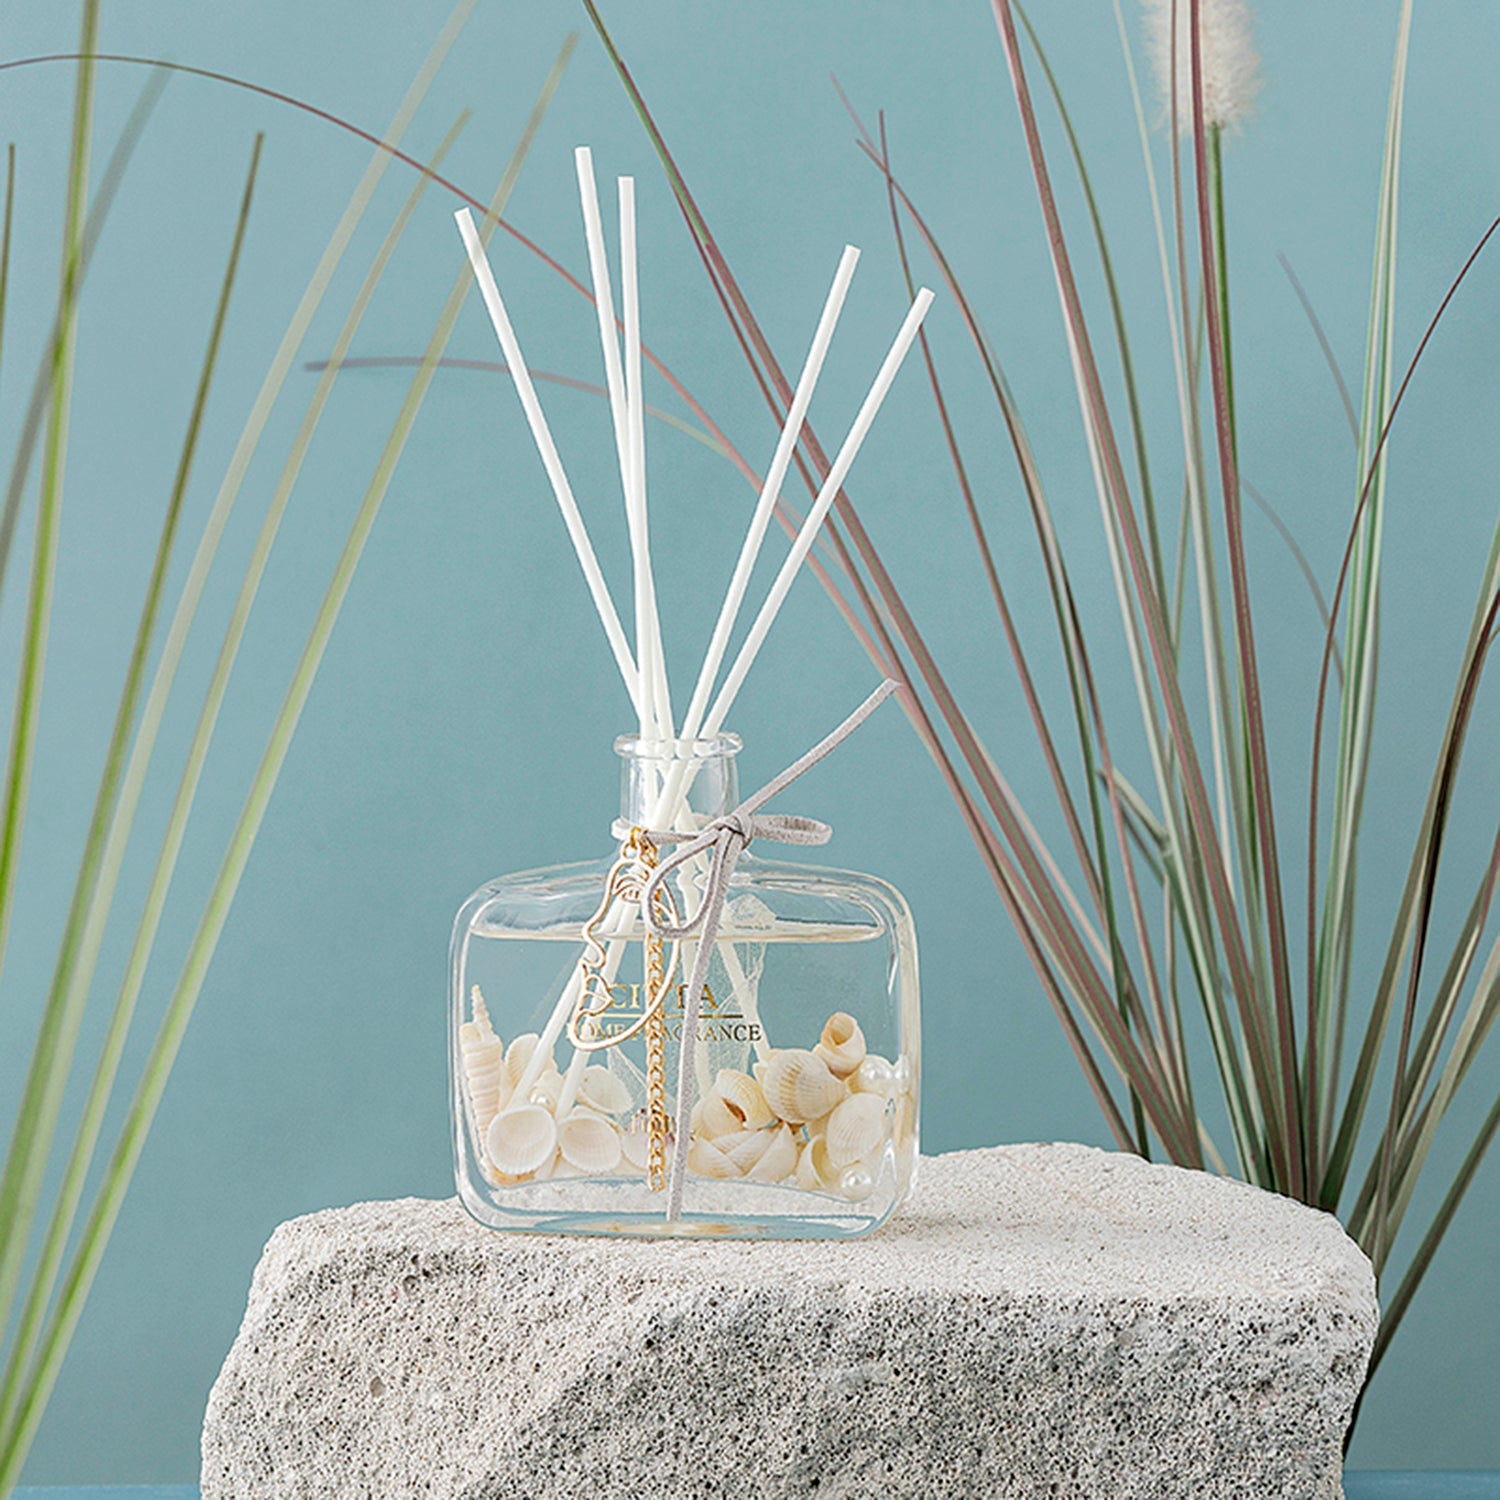 CITTA Summer Ocean Series Reed Diffuser Aromatherapy 100ML Premium Essential Oil with Reed Stick and Conch/Pearl Reed Diffuser CITTA 